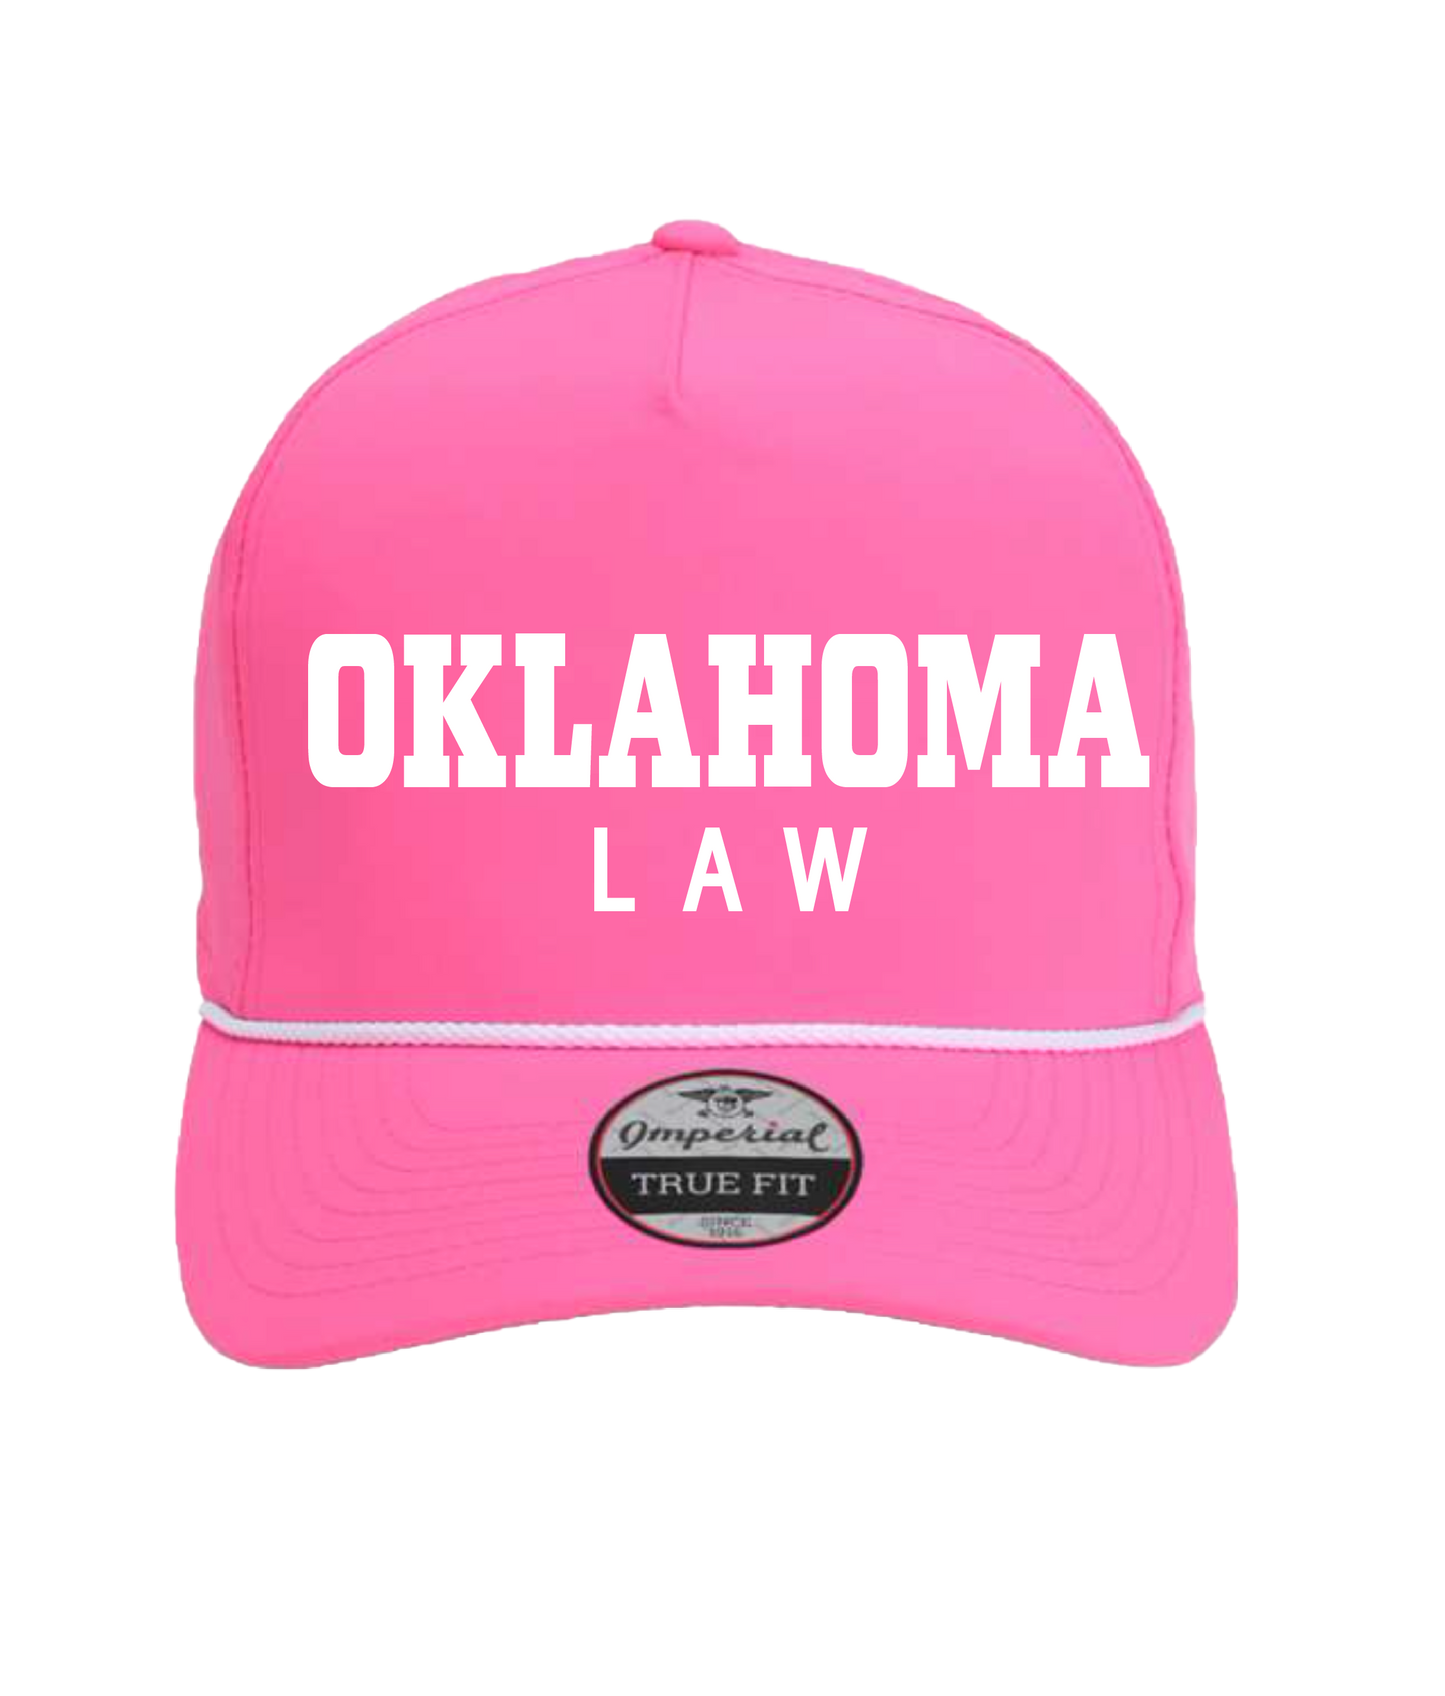 Oklahoma Law block on Imperial high crown